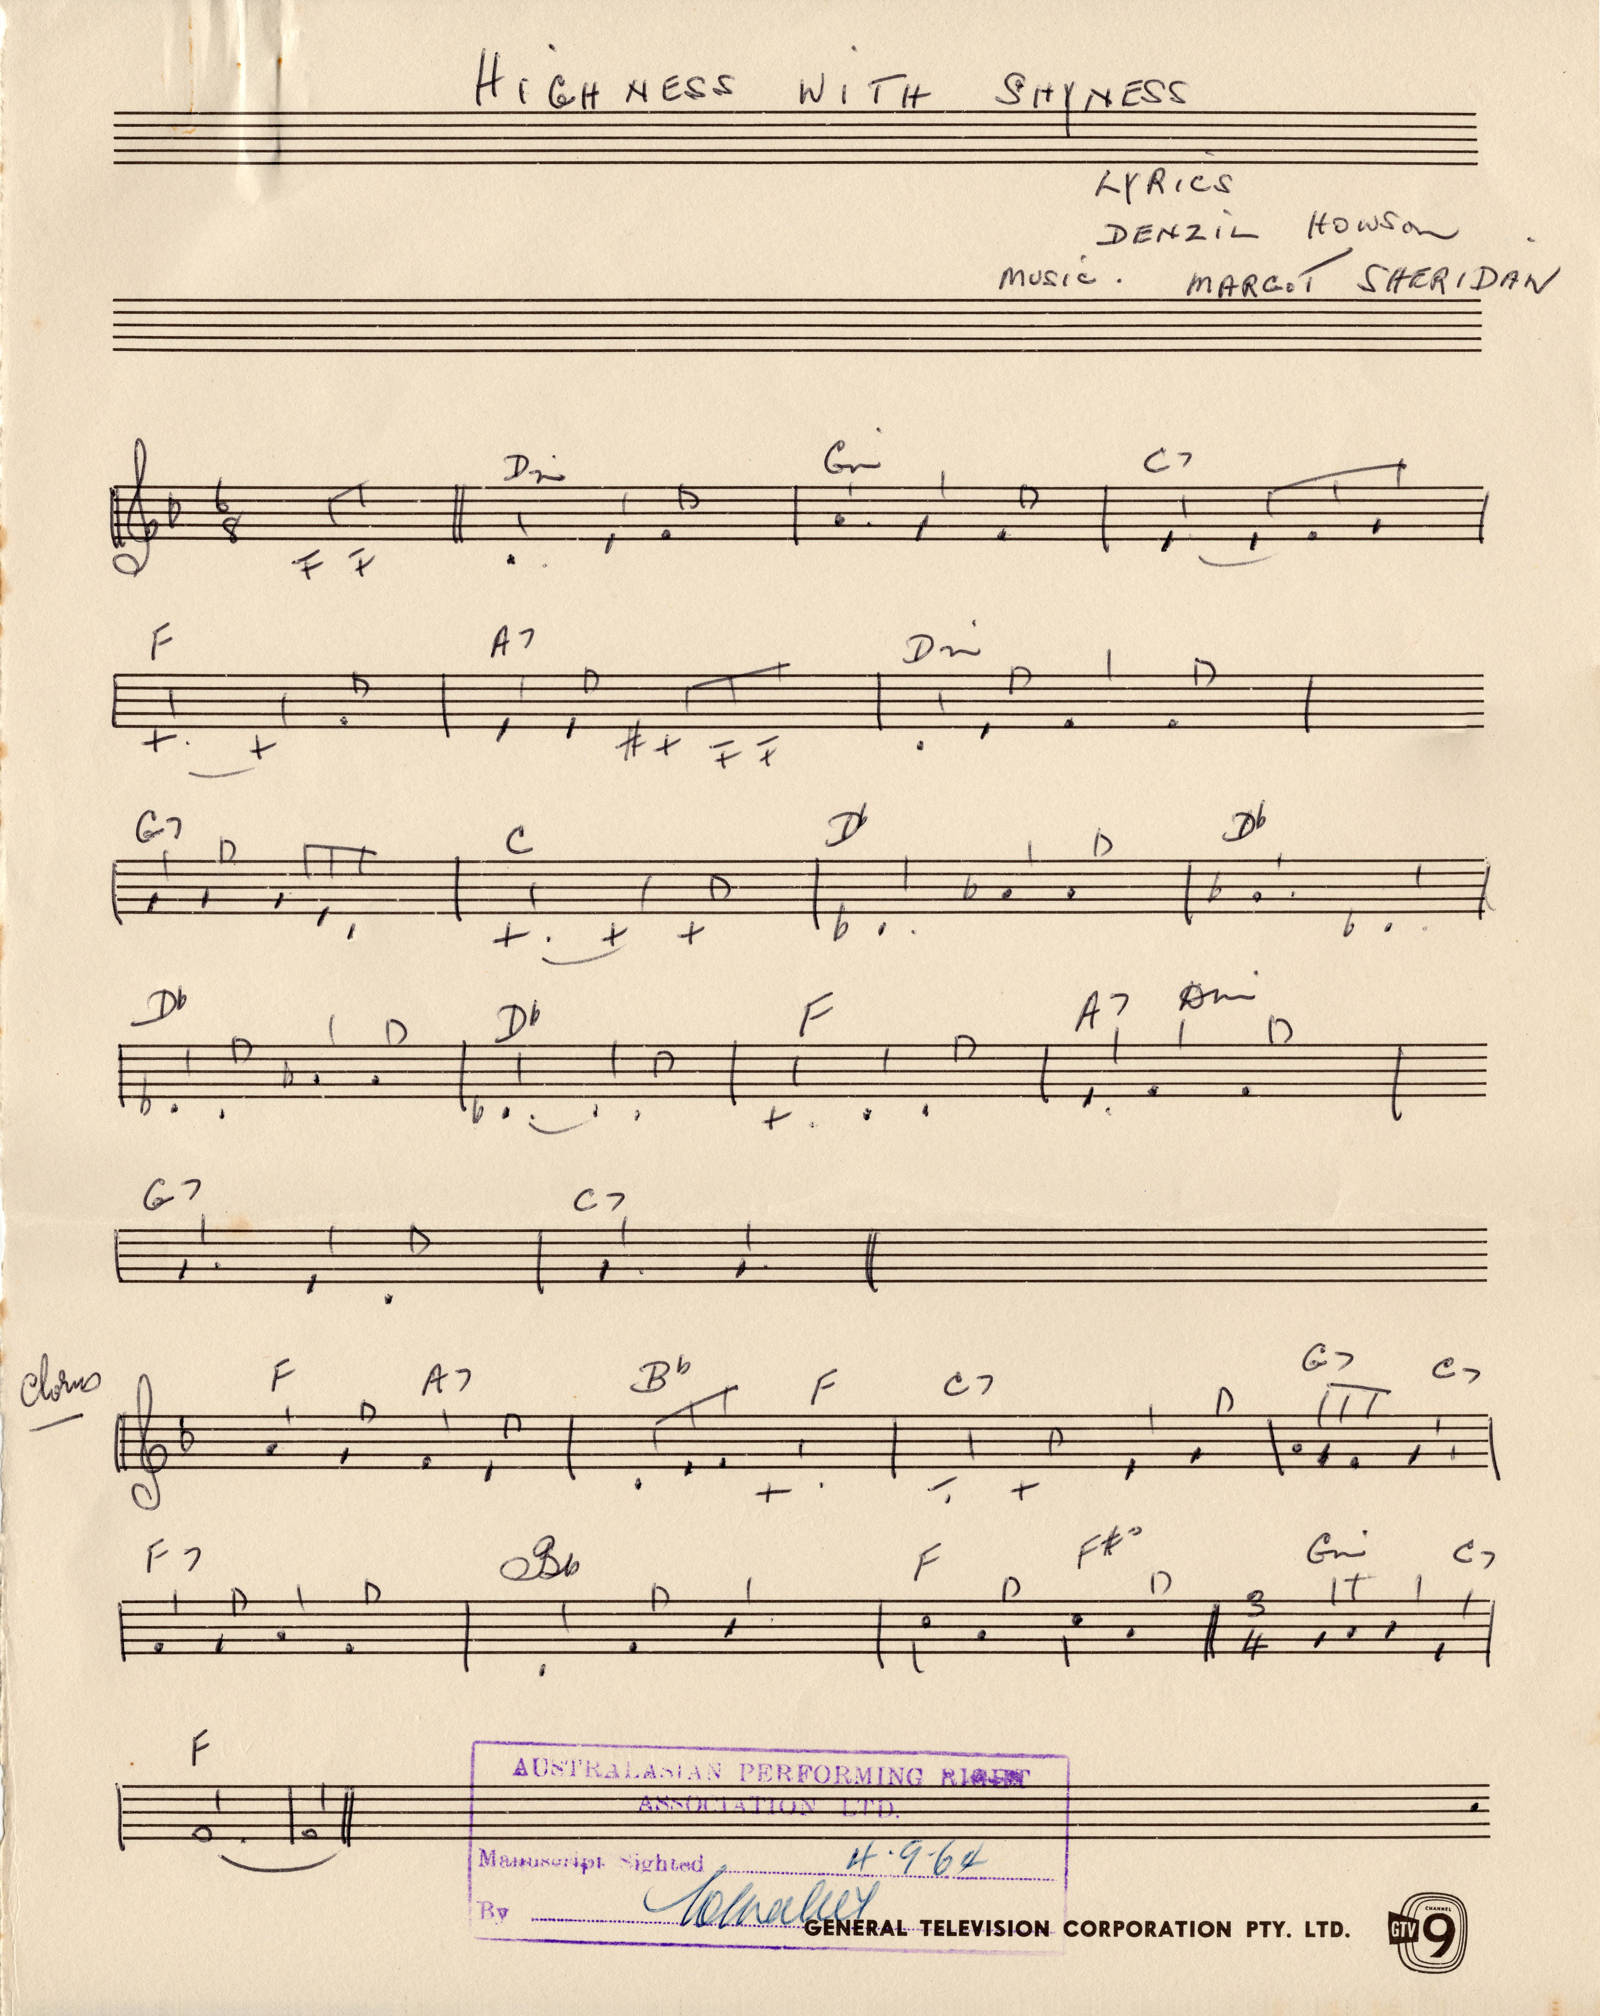 music score of “Highness With Shyness” song